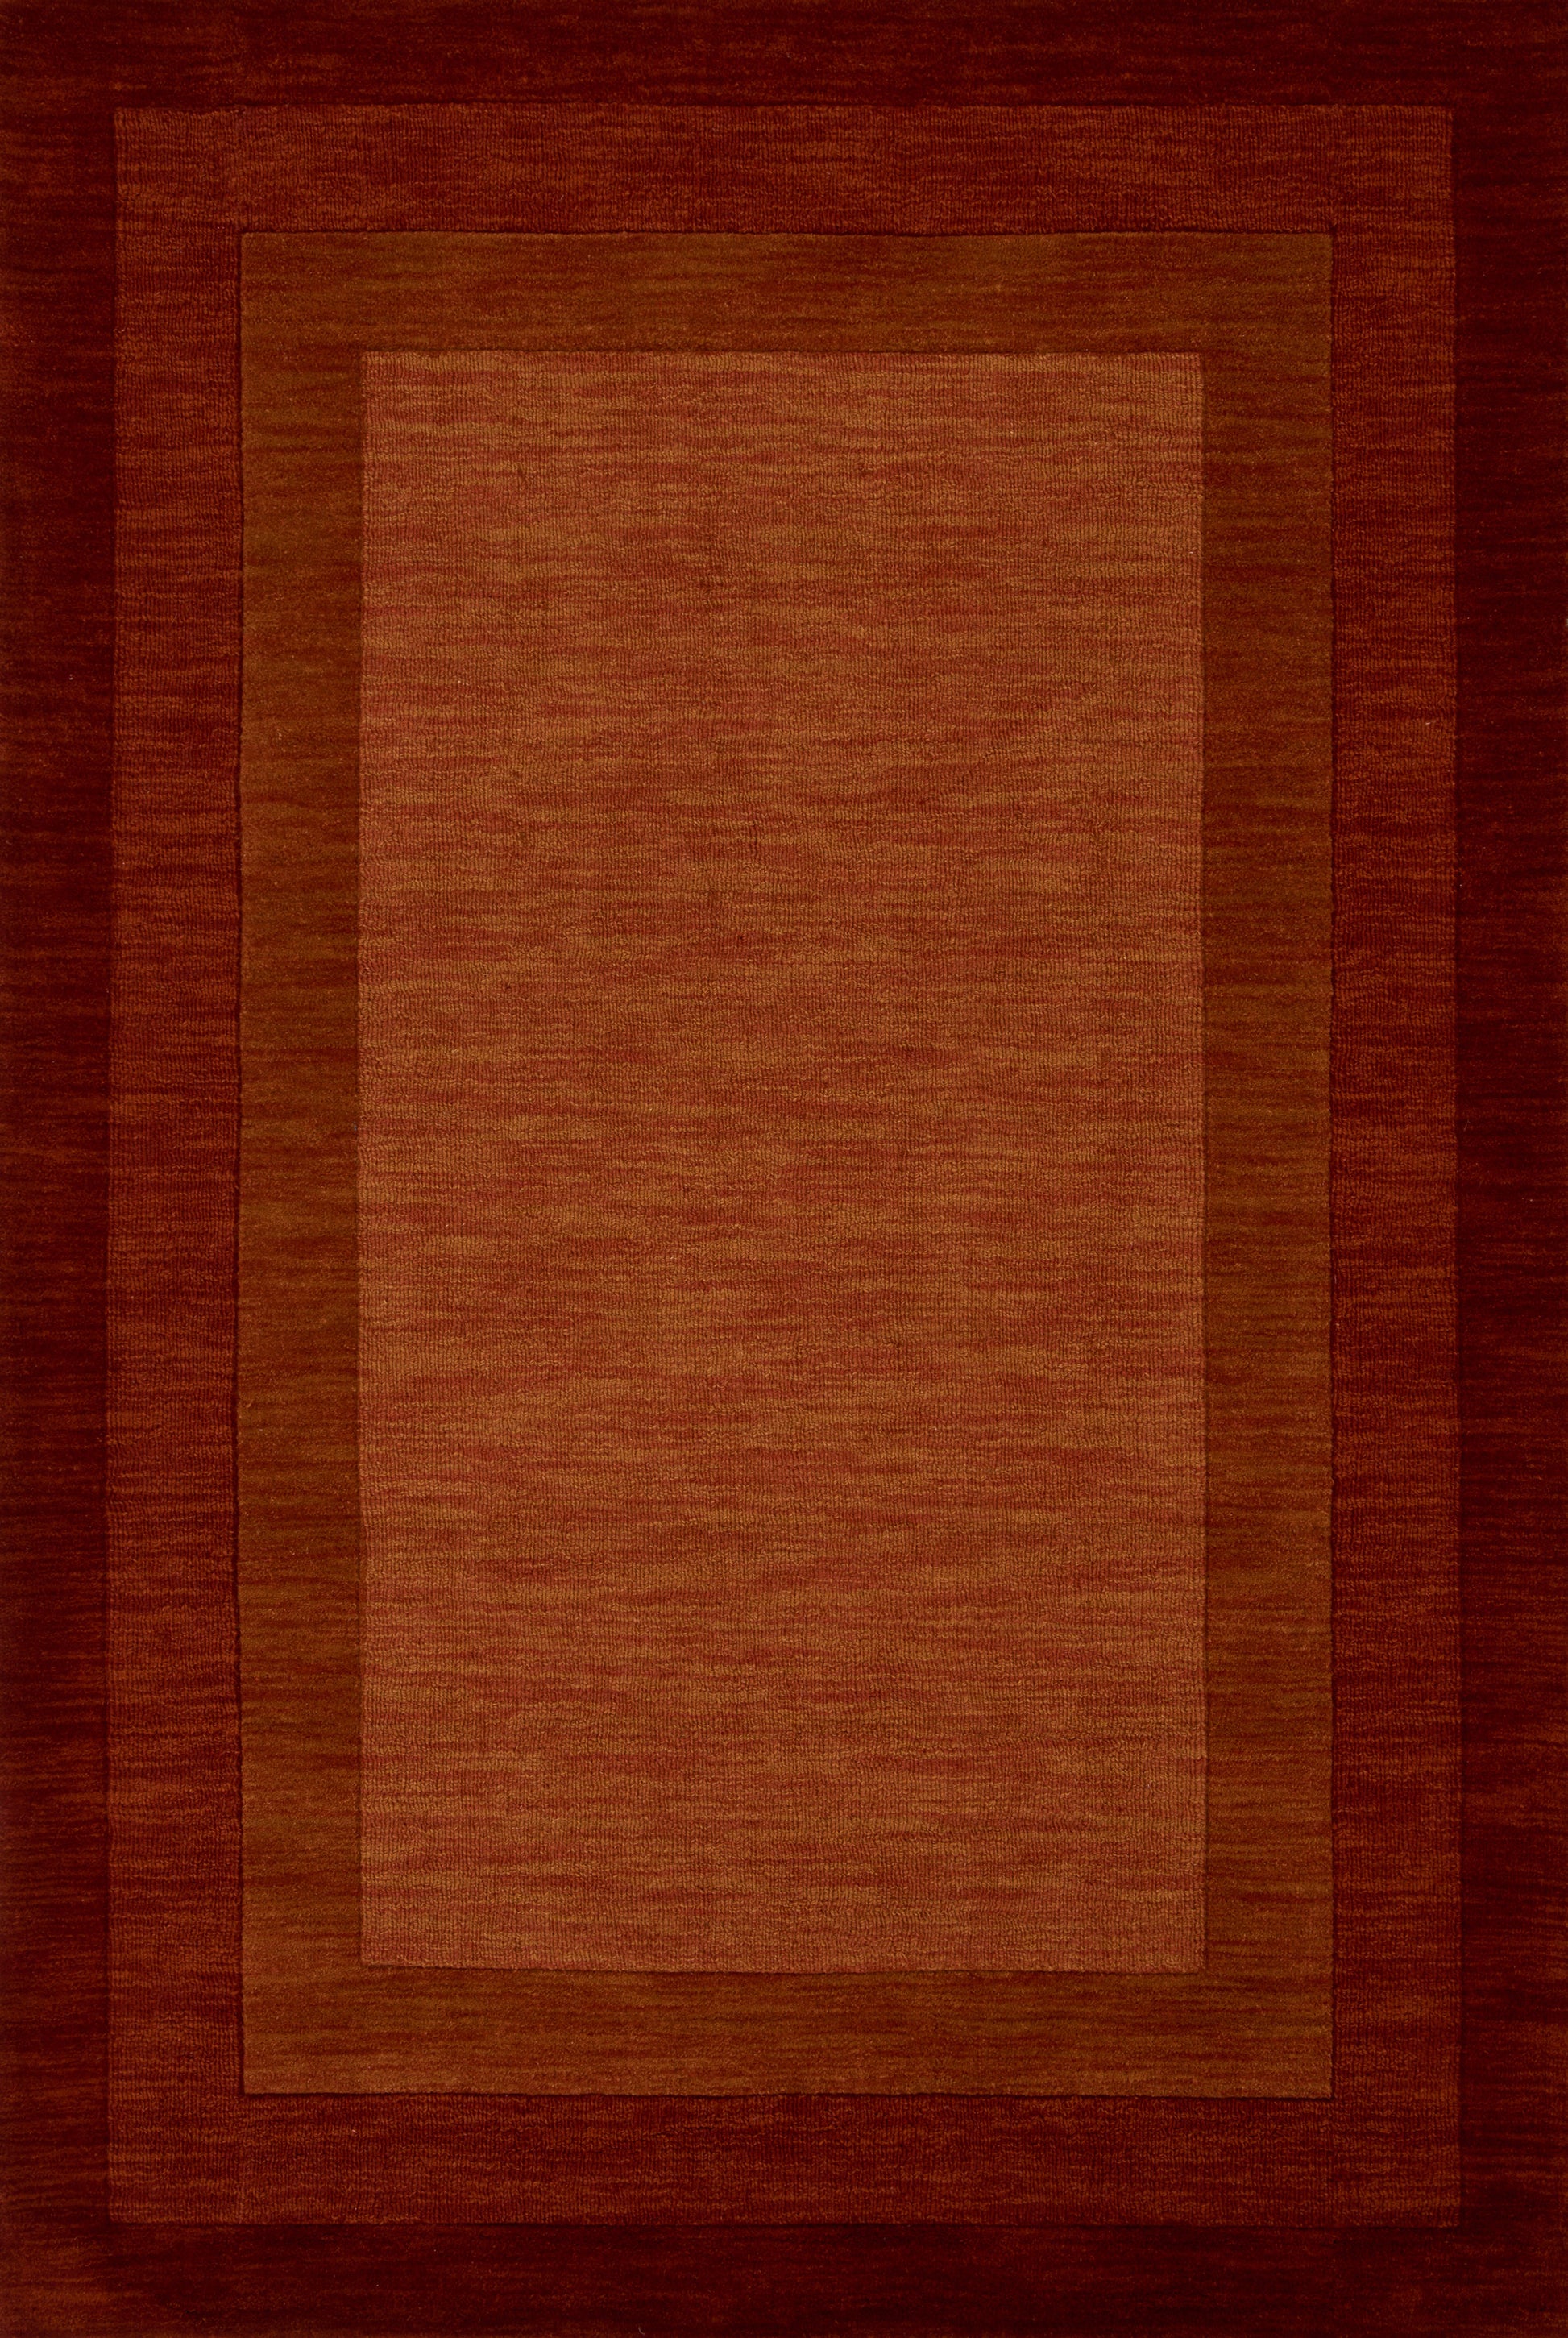 A picture of Loloi's Hamilton rug, in style HM-01, color Rust